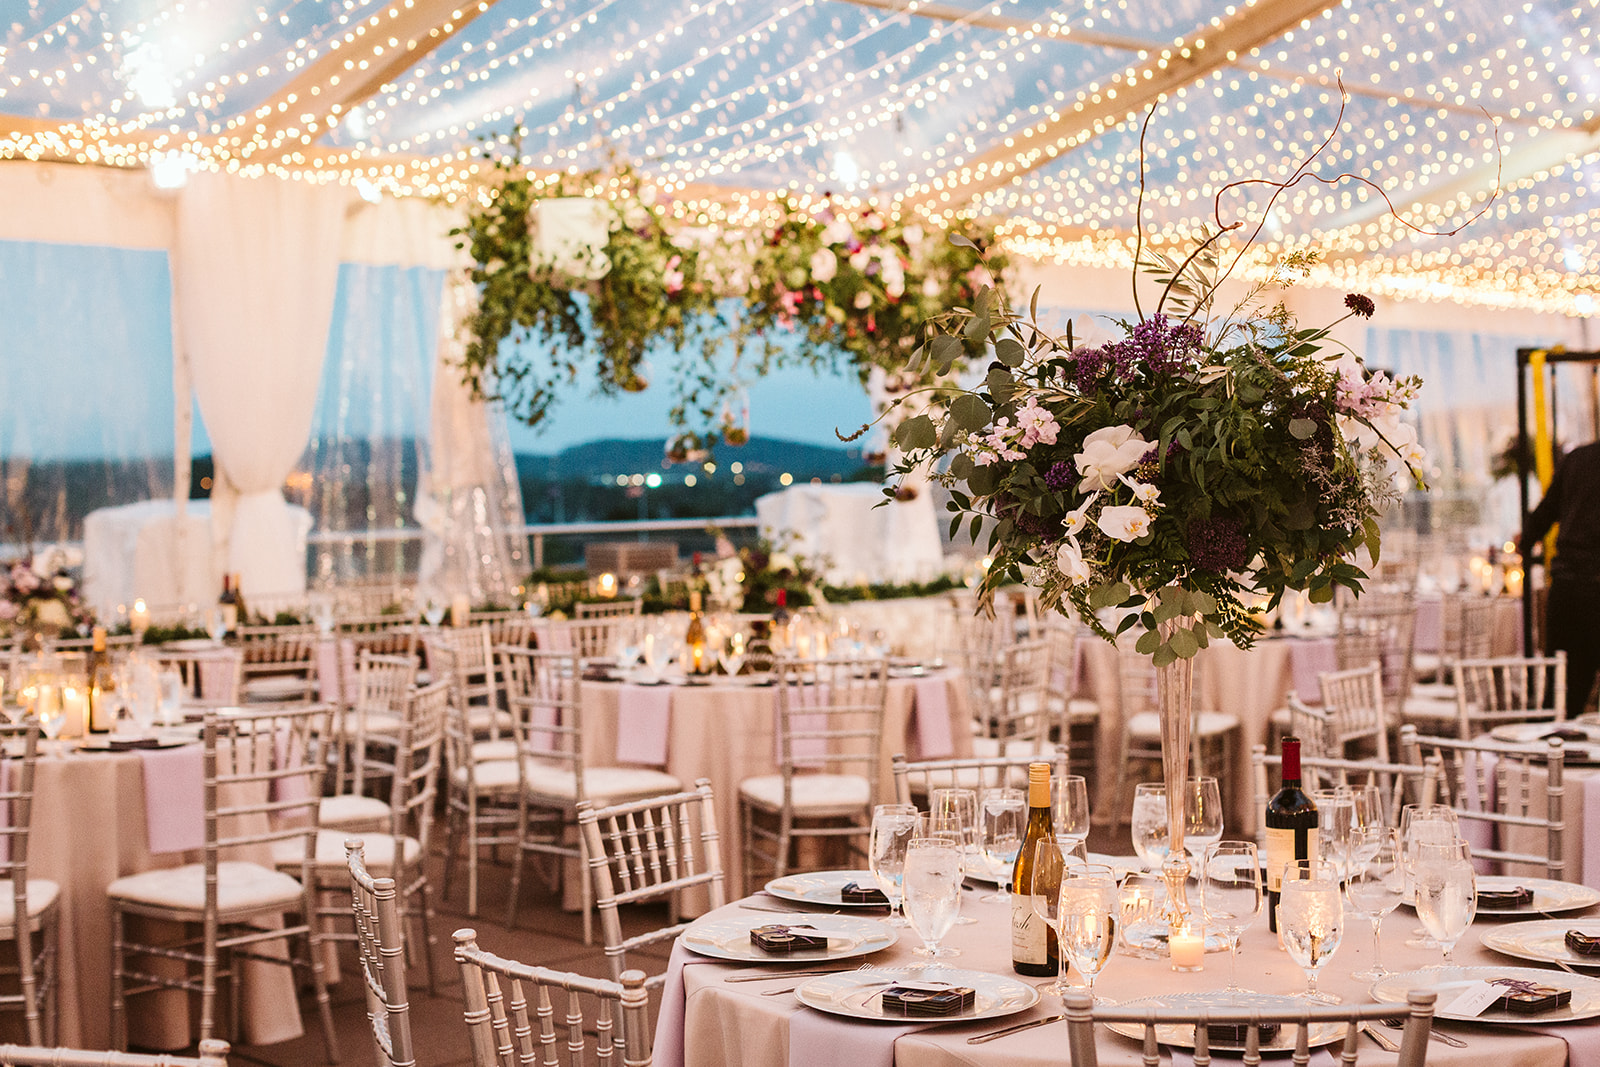 An outdoor wedding reception space decorated with fairy lights and greenery.